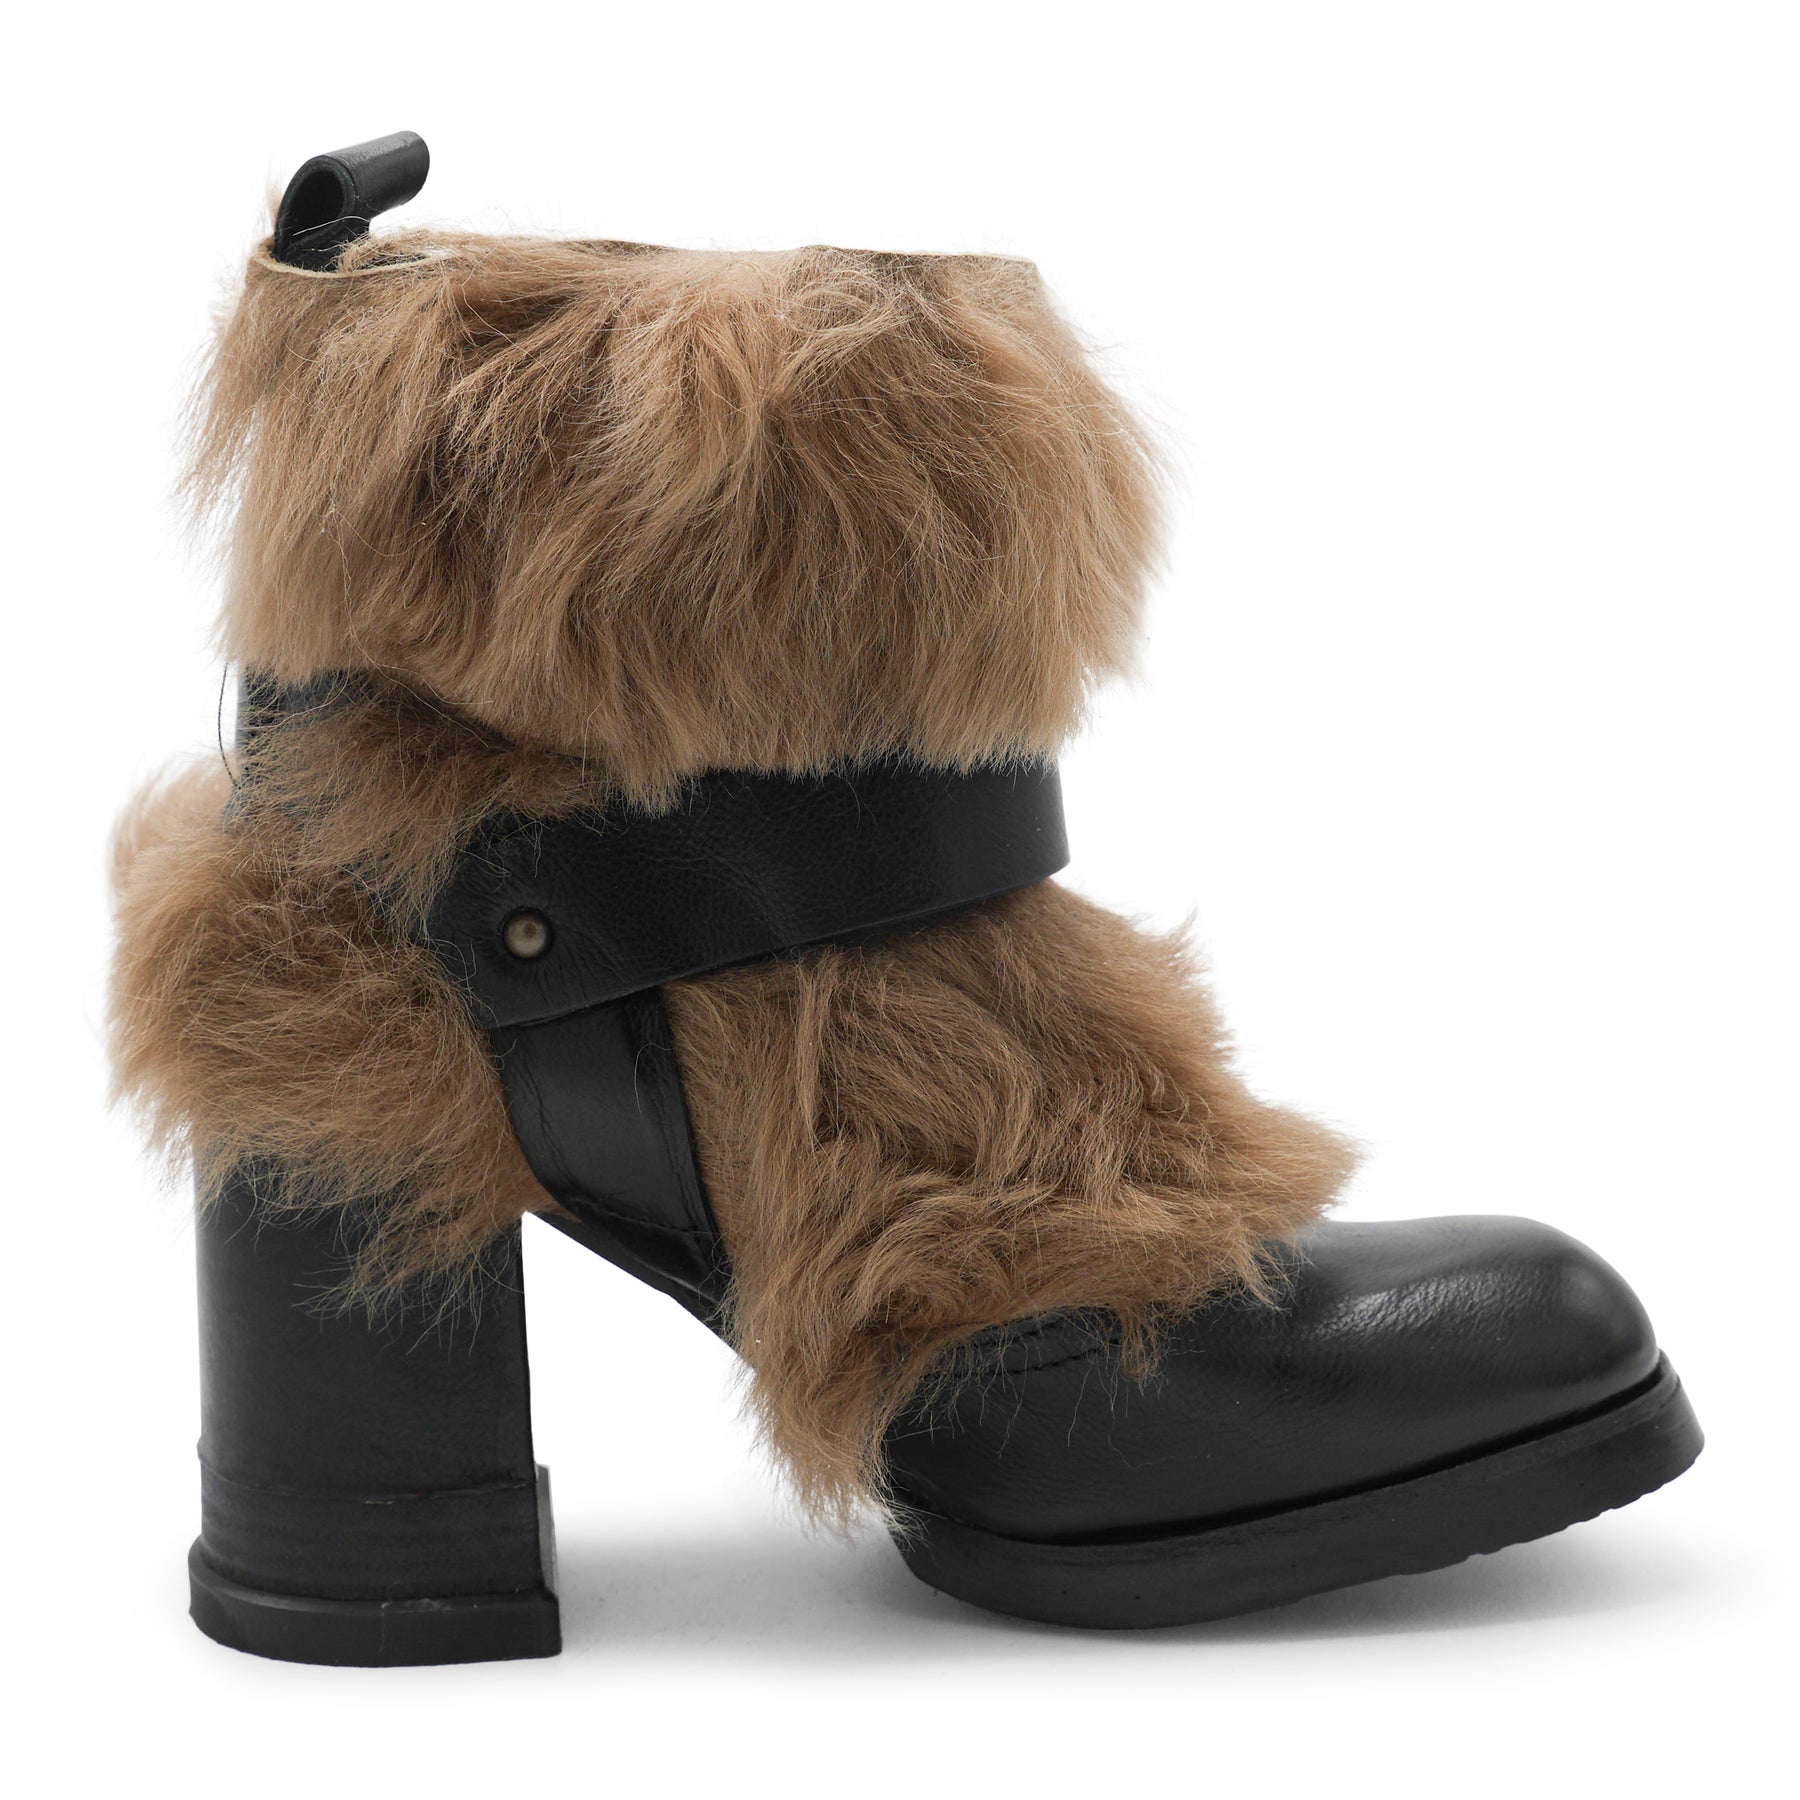 42206 - Black Leather Buckle Strap Boot With Fur